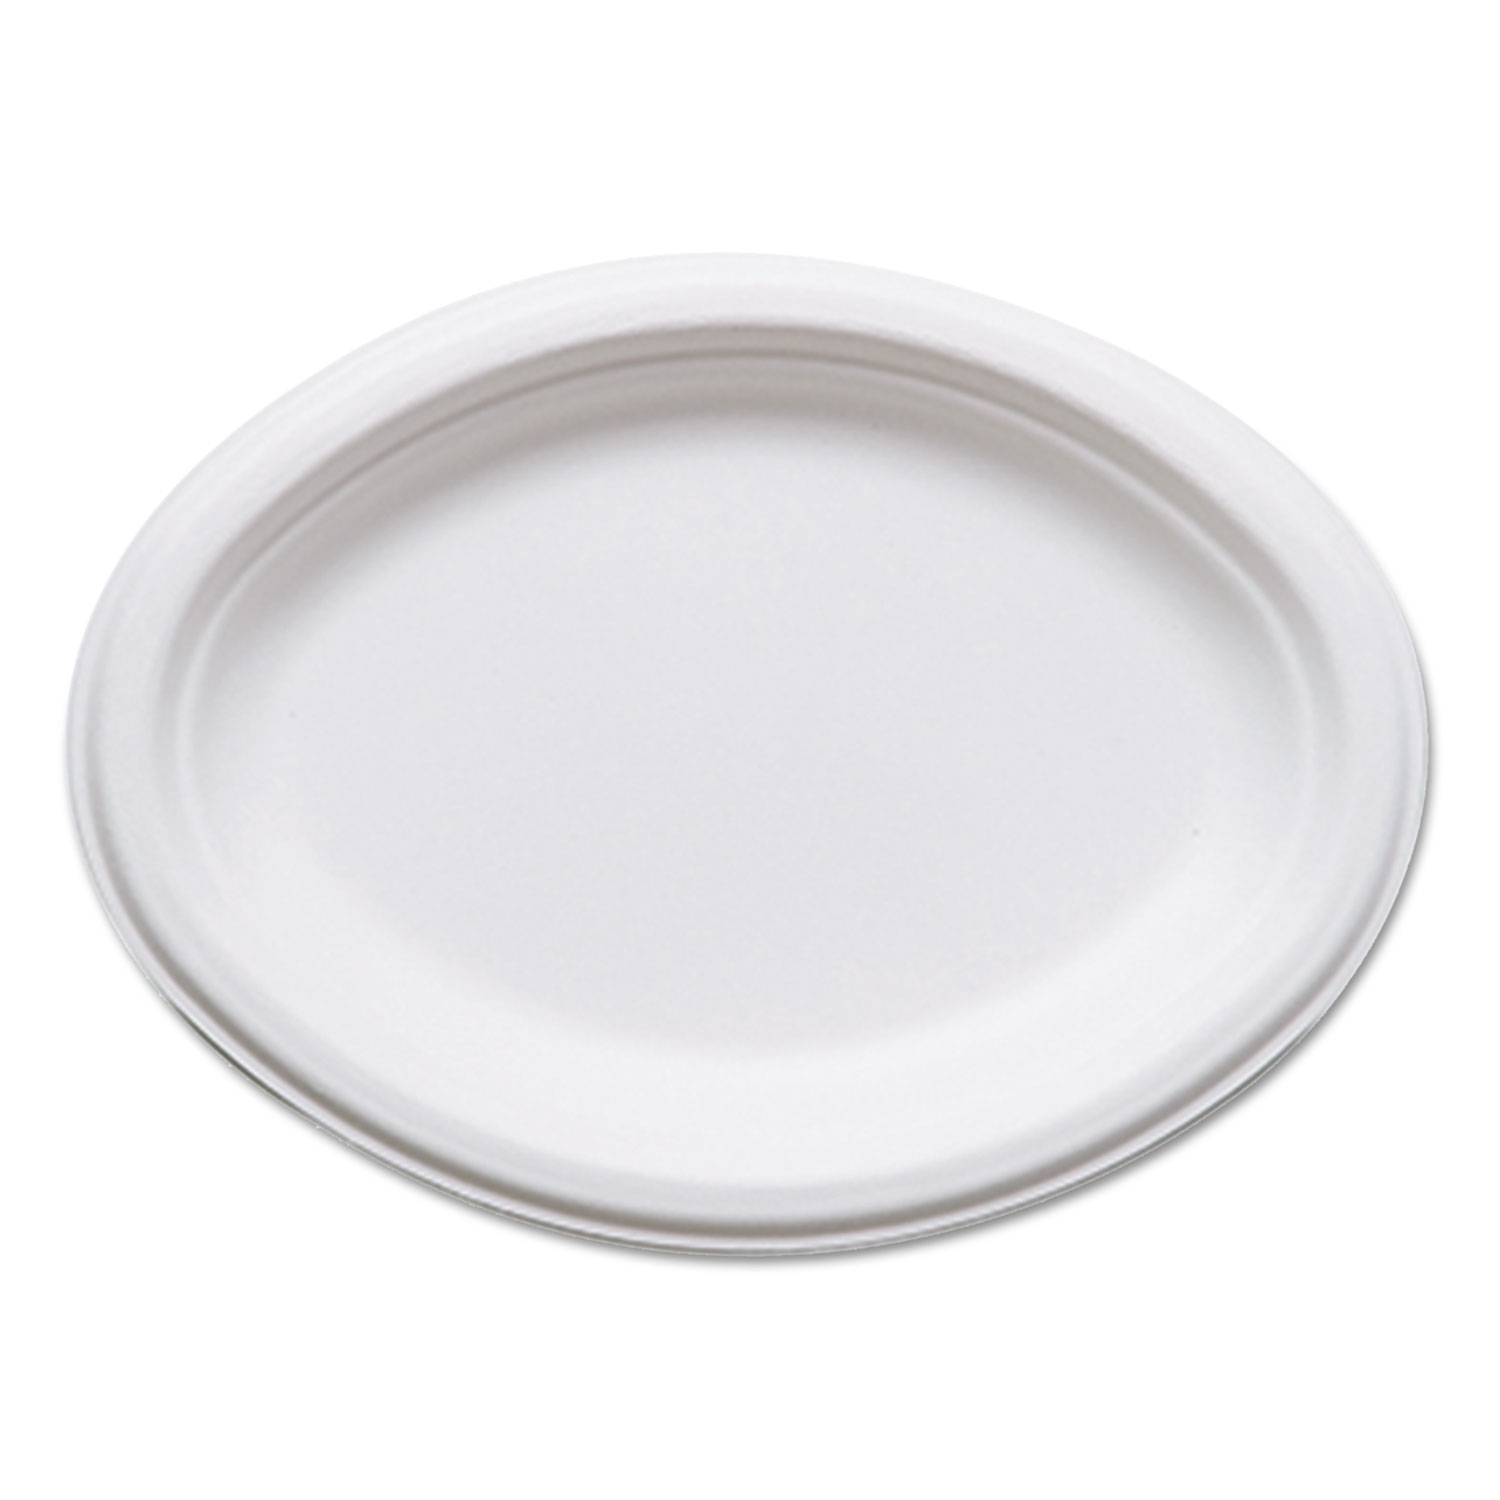  Eco-Products EP-P009 Renewable and Compostable Sugarcane Plates, Oval - 10 x 7, 50/Packs, 10 Packs/Carton (ECOEPP009) 